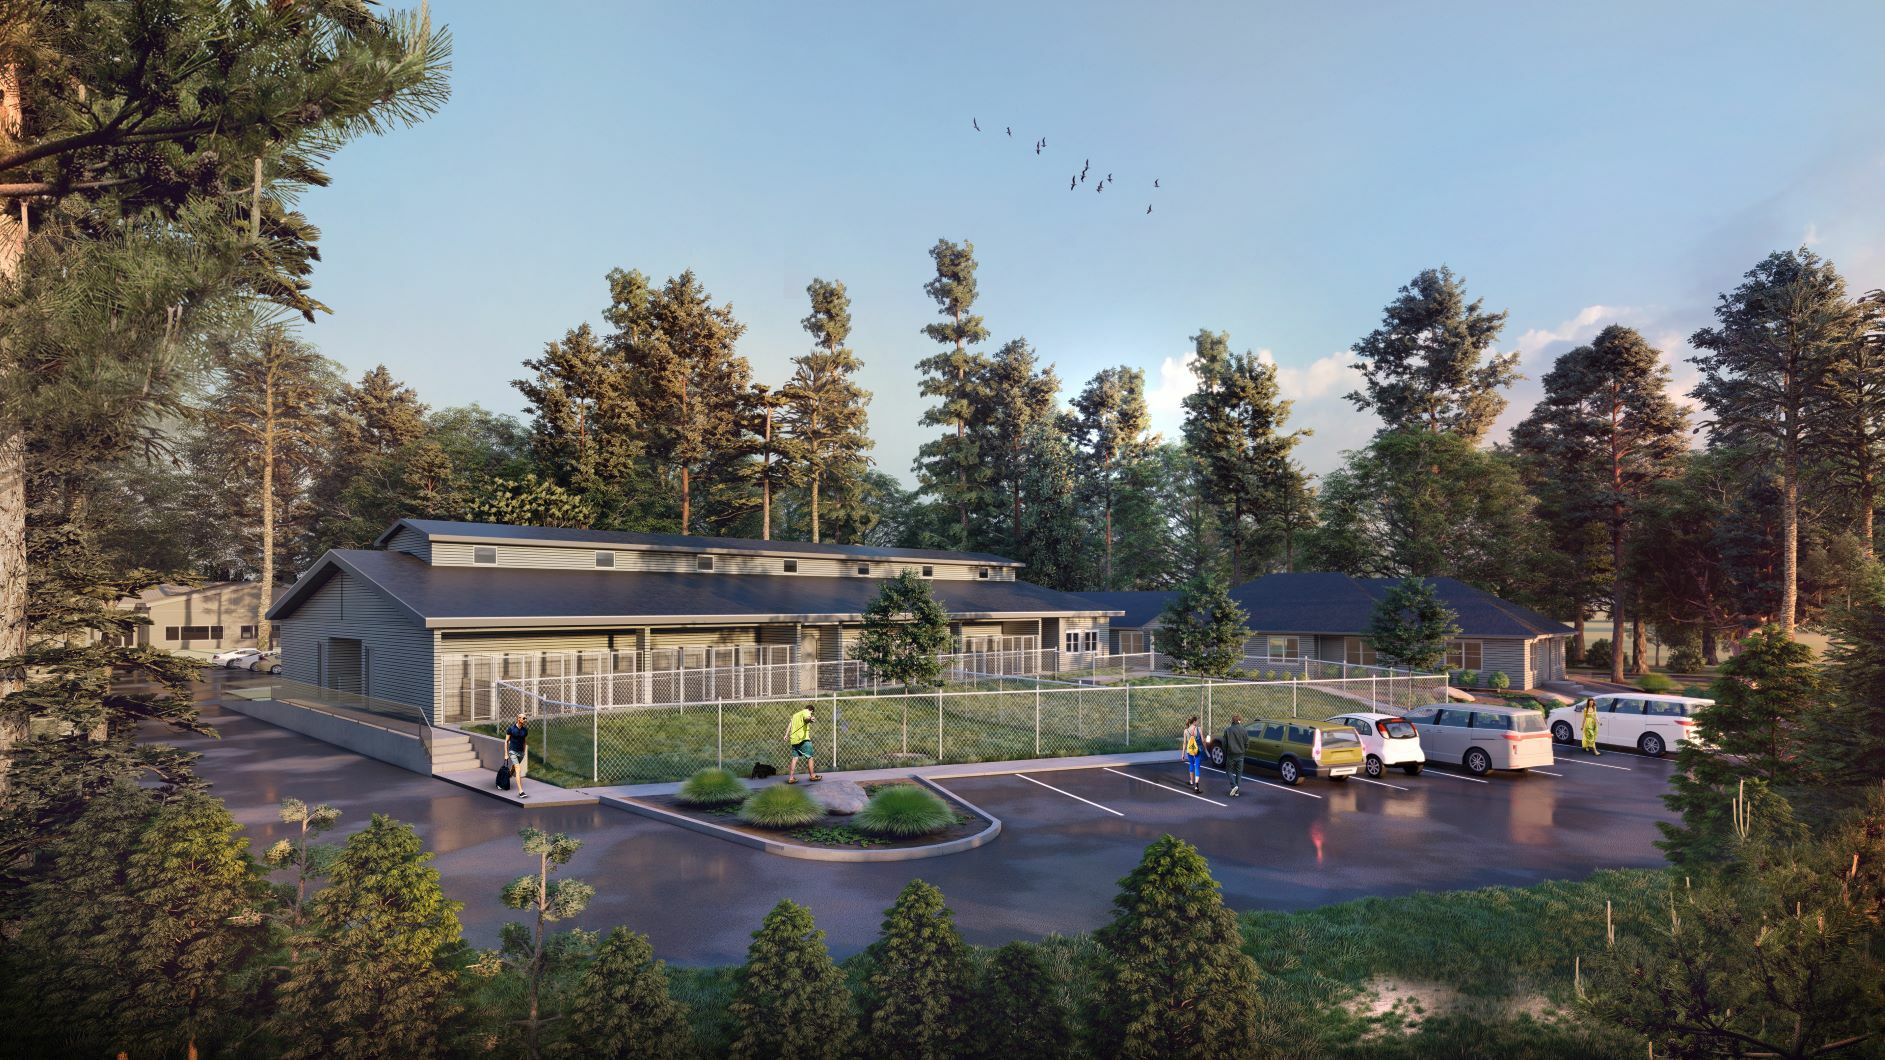 ARF's  dogs will move into a new 7,000 square foot kennel building The building will include 40 individual kennels along with flexible rooms for dogs with special needs, meet-and-greet rooms for adopters, and new outdoor exercise areas.   COURTESY ARF